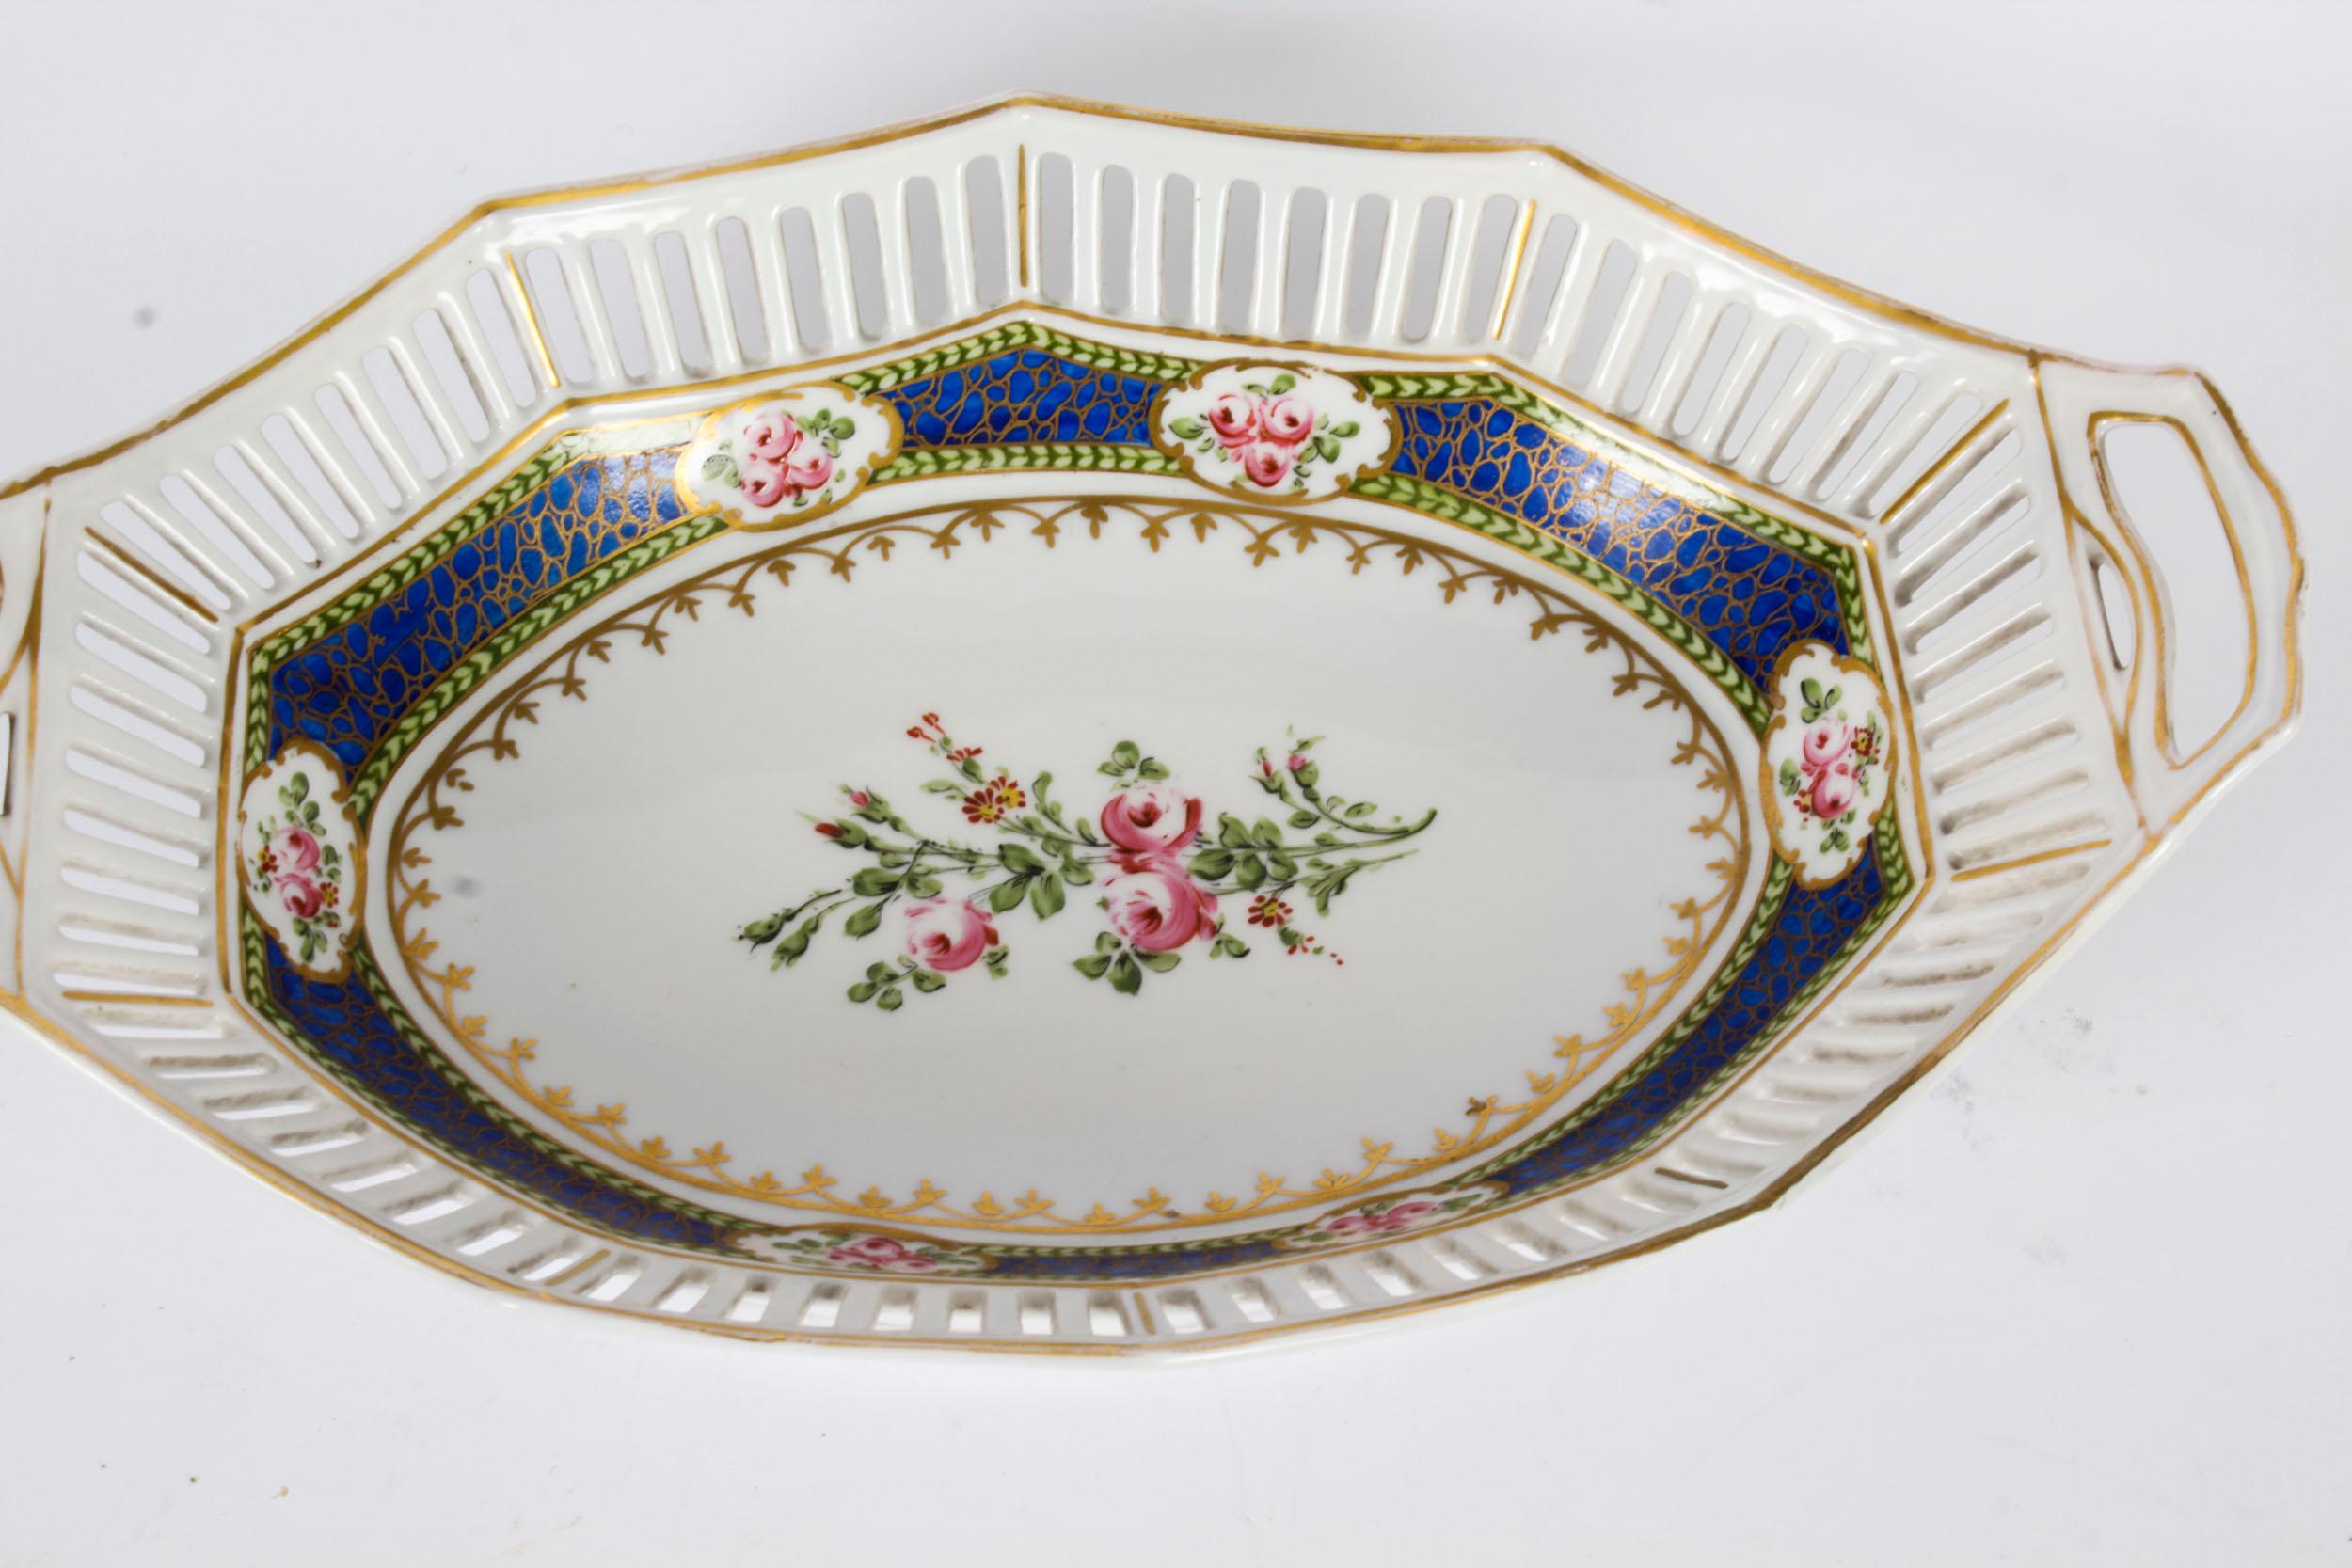 Antique French Sevres Oval Porcelain Dish Late 19th Century In Good Condition For Sale In London, GB